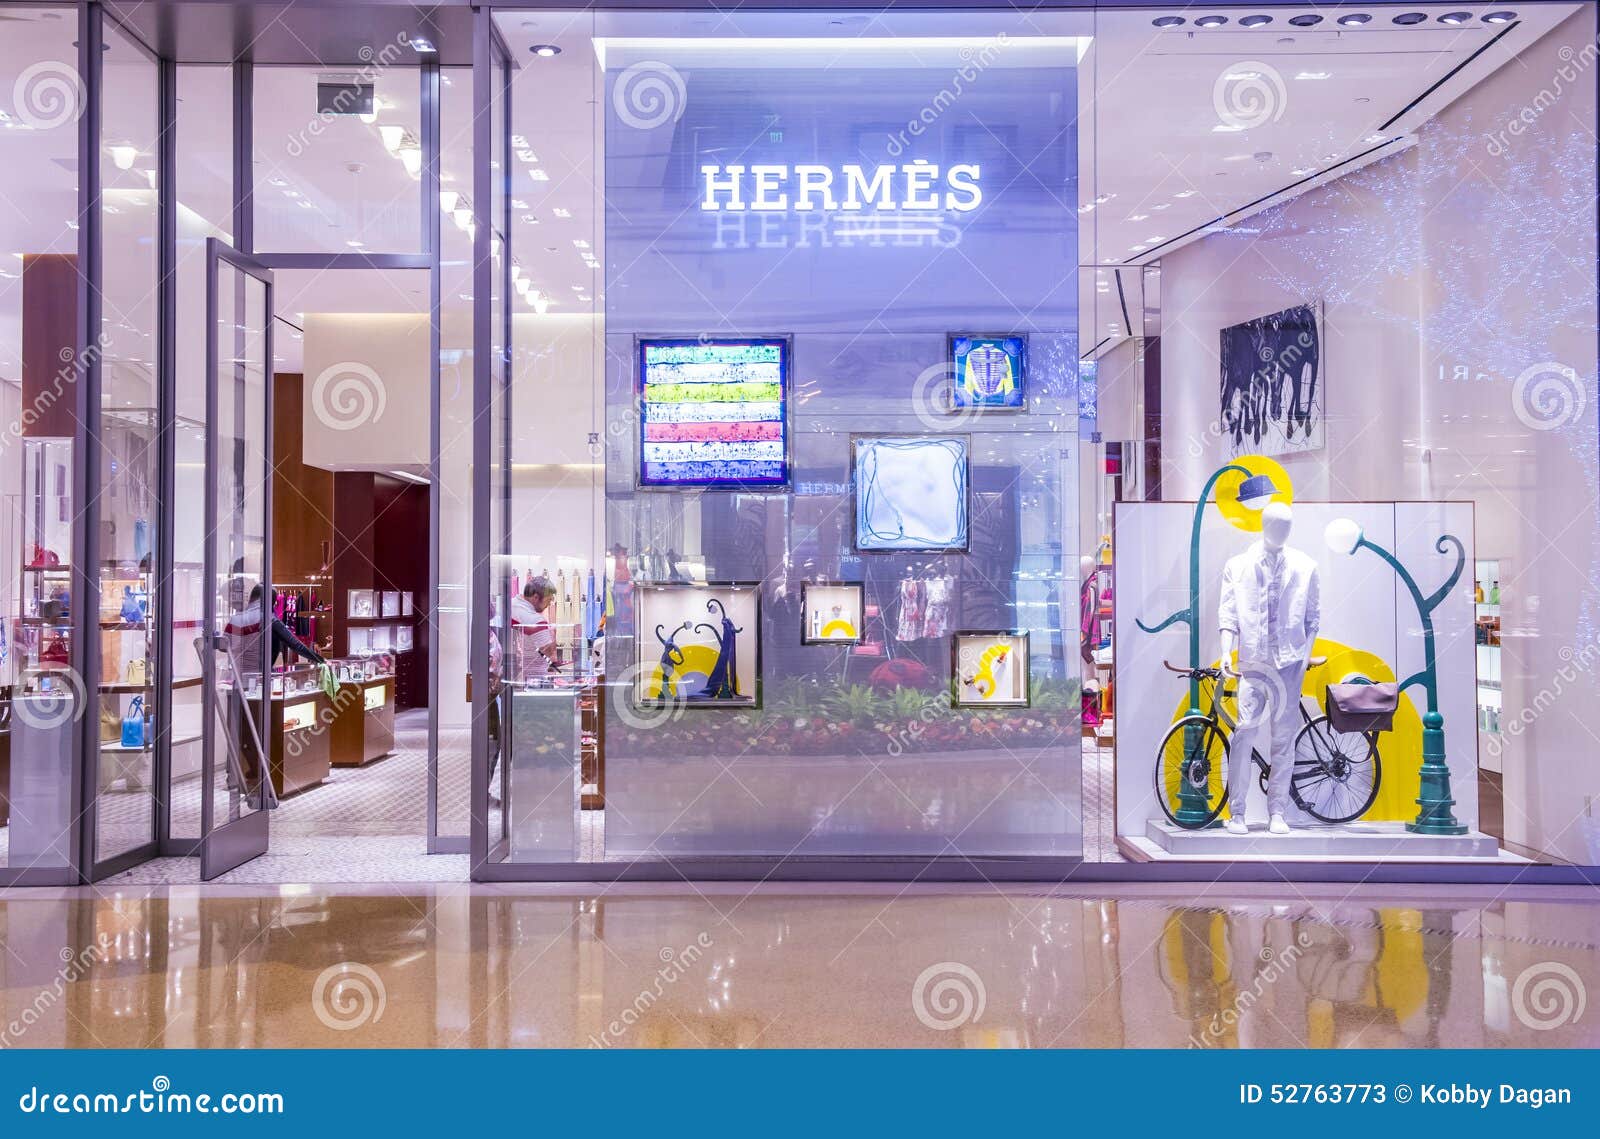 Hermes store editorial stock photo. Image of shop, money - 52763773